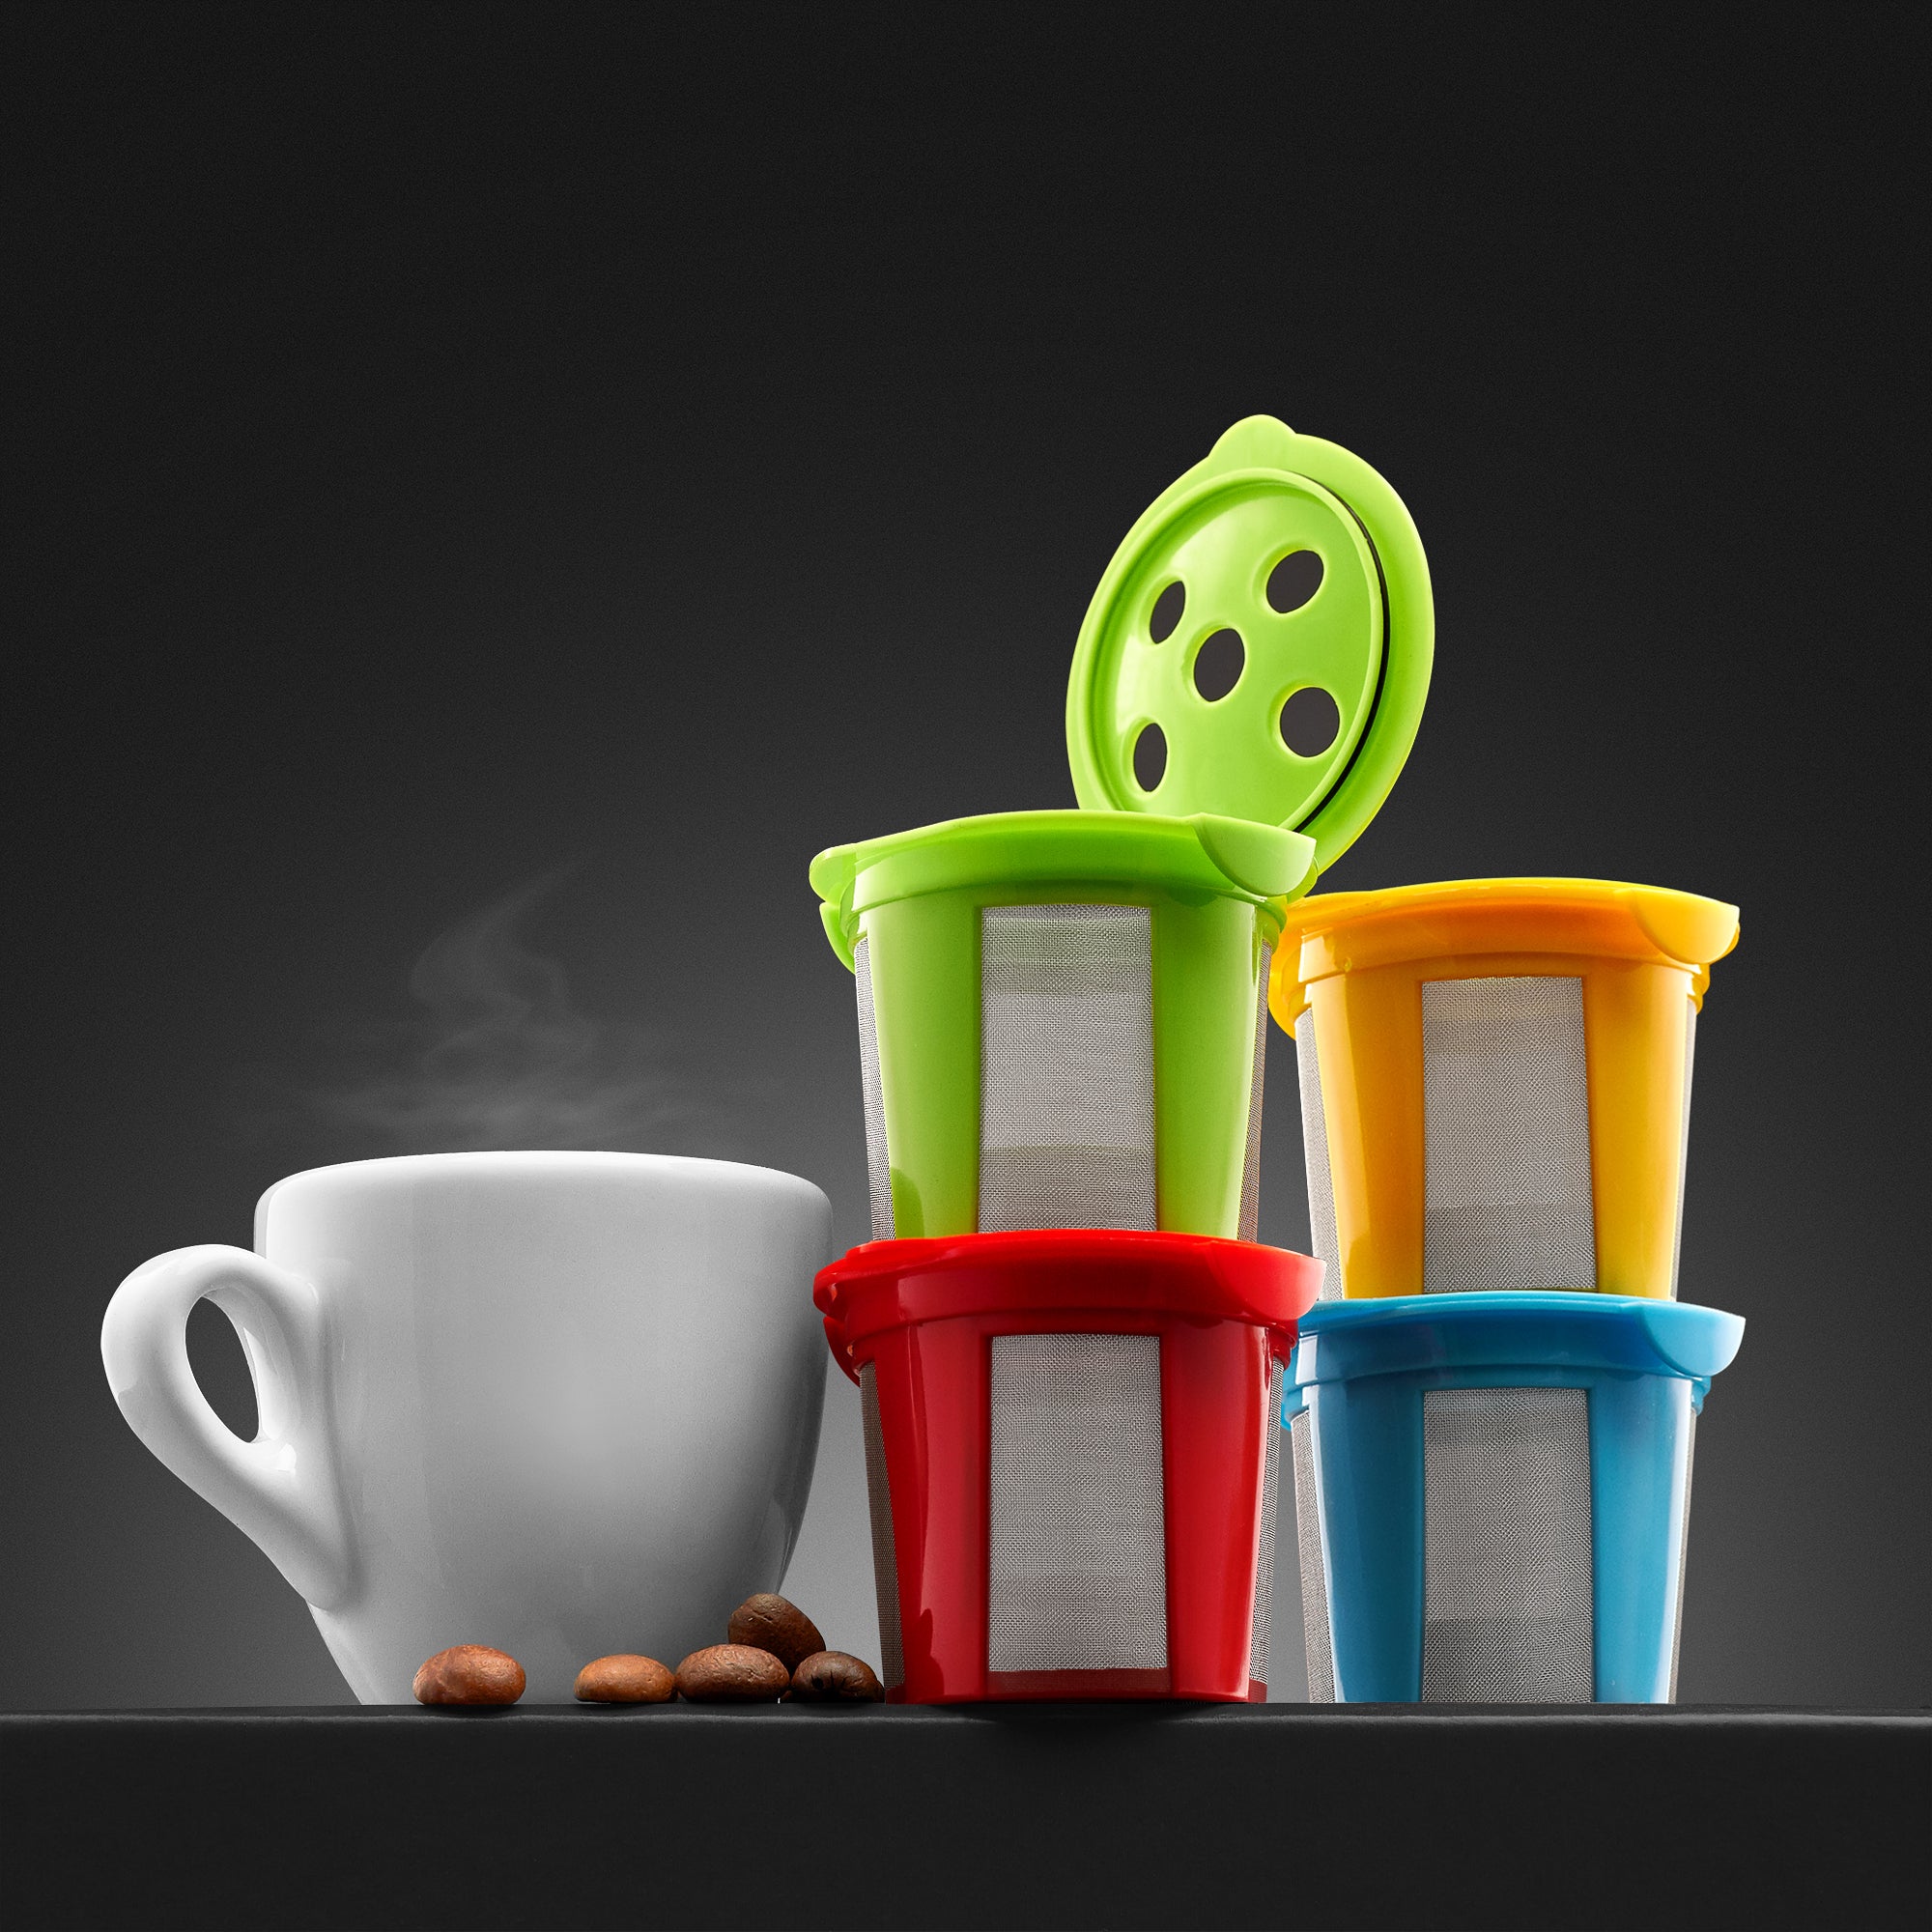 4 Reusable K Cups for Keurig K Supreme, K Supreme Plus and K Slim with Multistream Technology - Multicolored